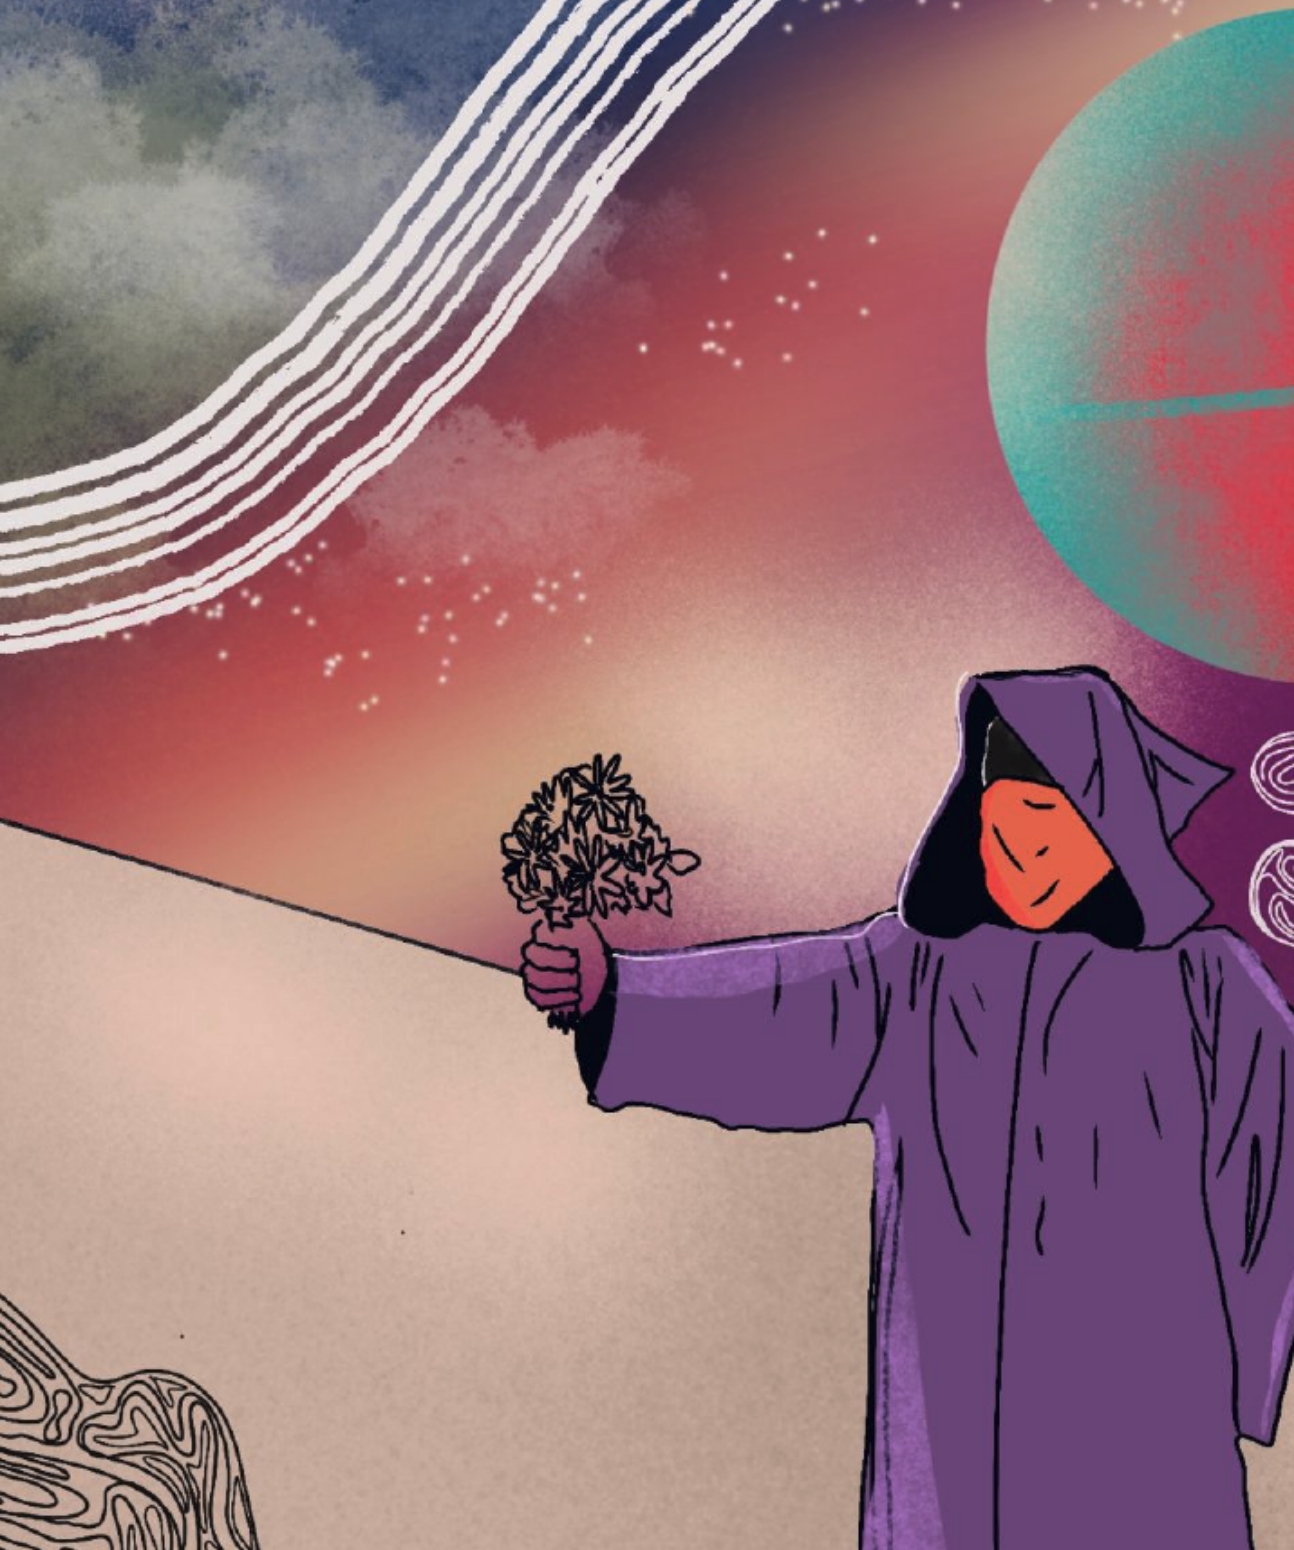 Digital illustration of a man cloaked in purple, standing under a multi-planet skyscape, extending a hand holding flowers as an offering.